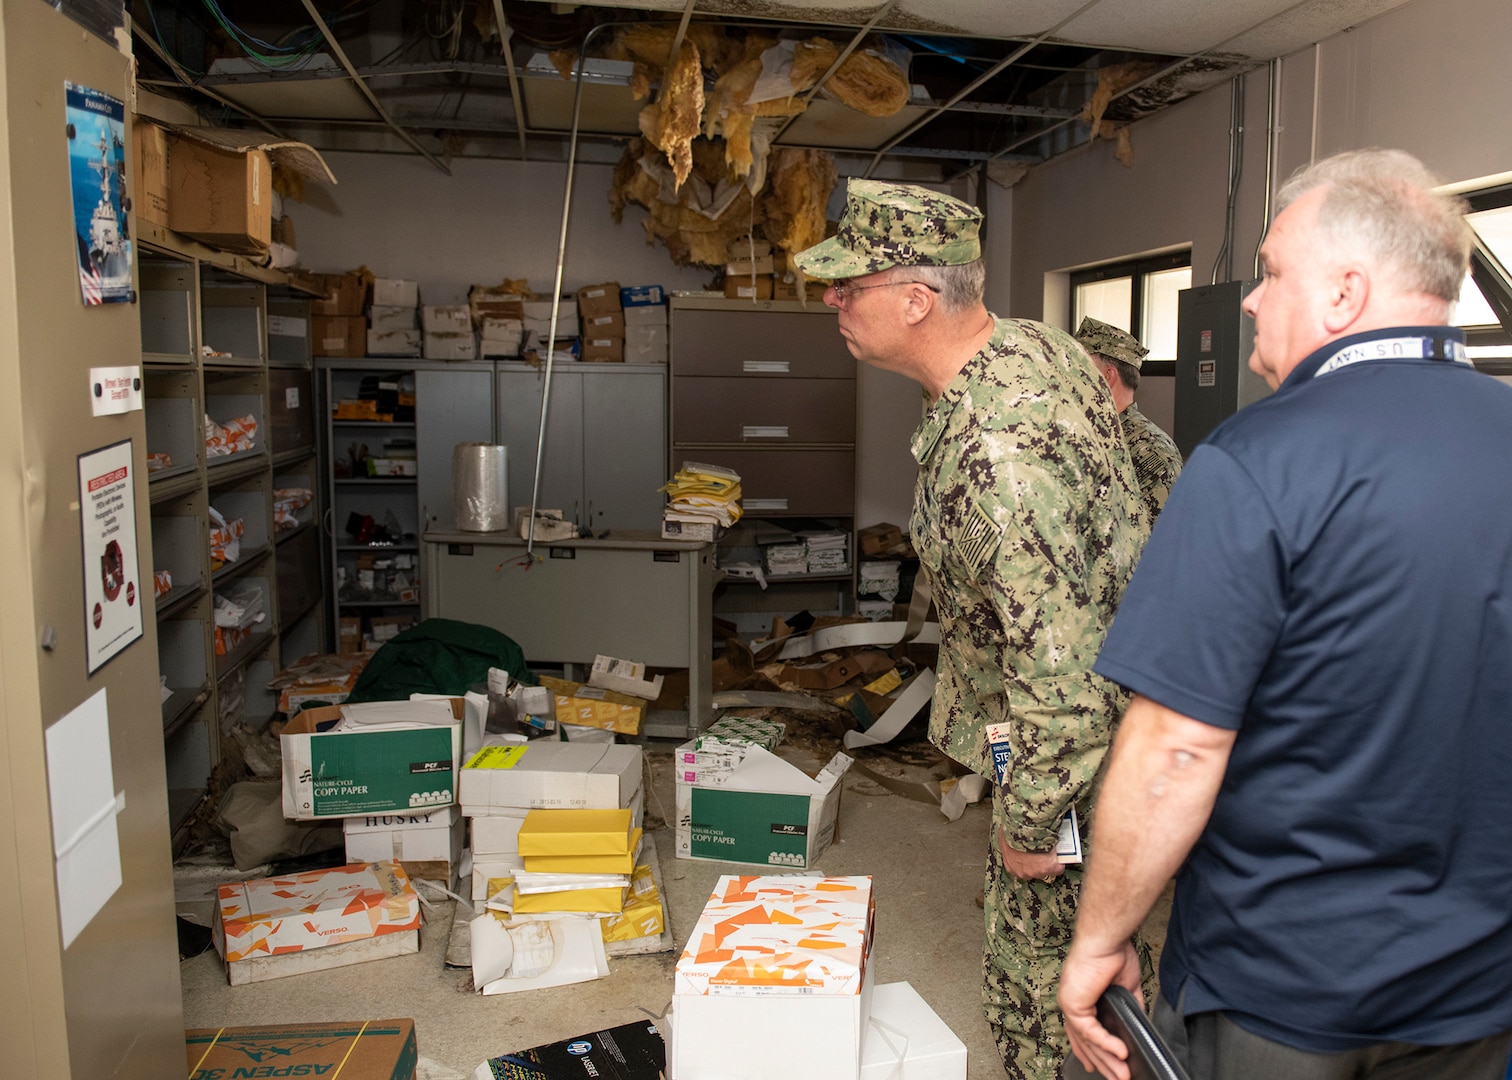 Ed Stewart, NSWC PCD technical director and Capt. Aaron Peters, commander, NSWC PCD, give Rear Adm. Eric Ver Hage, commander, Naval Surface and Undersea Warfare Centers, a tour of hurricane damaged buildings during Ver Hage’s visit to NSWC PCD April 30, 2019.